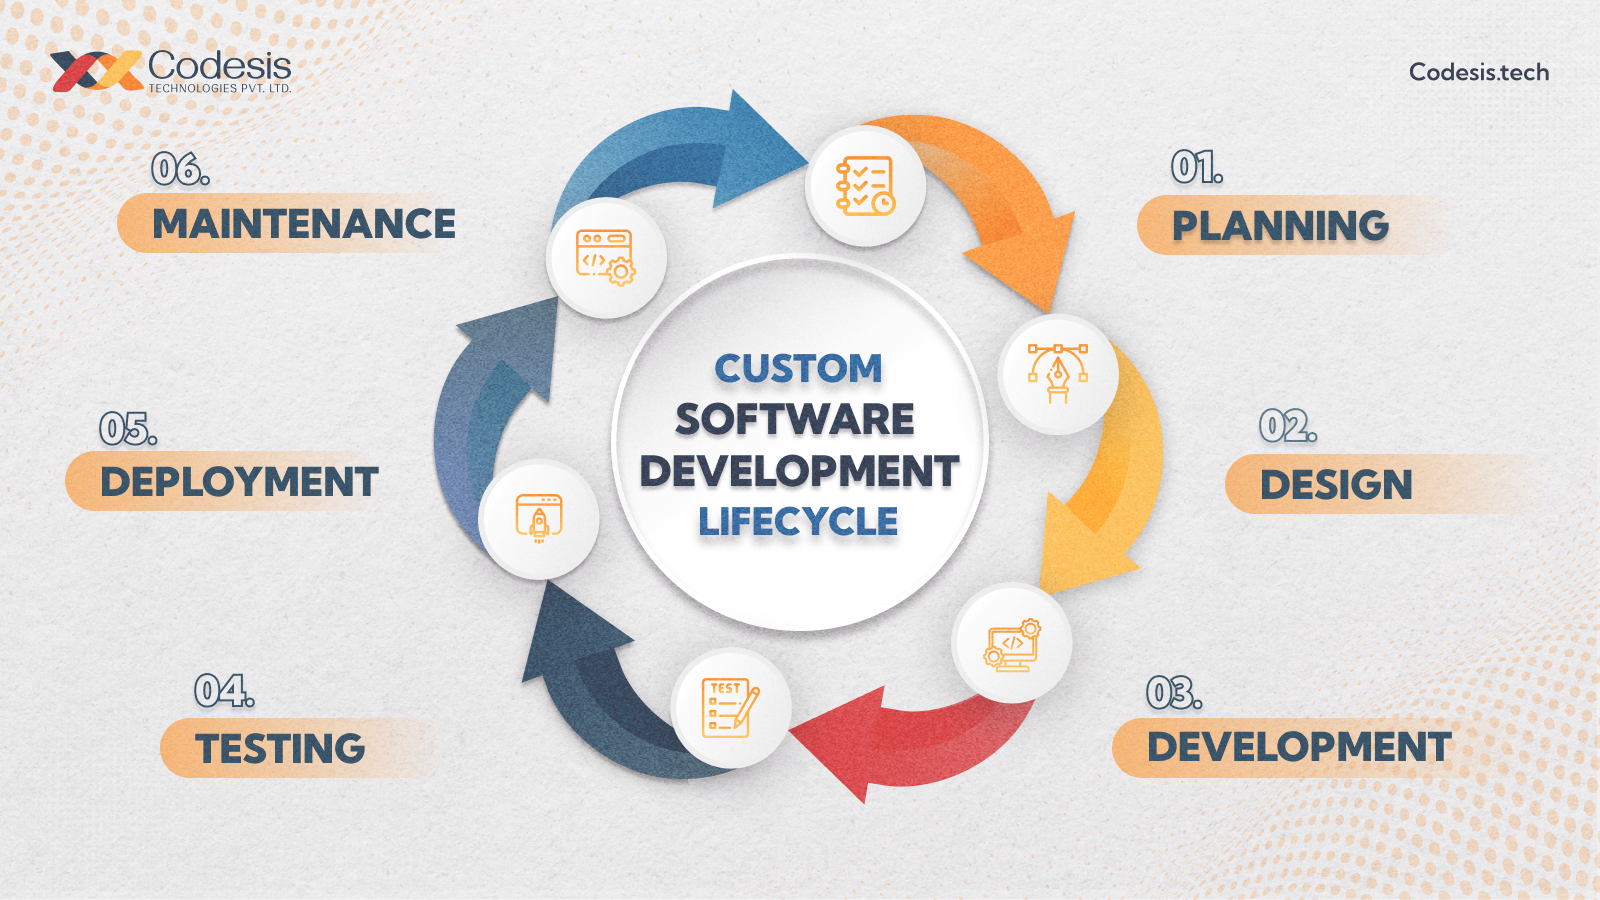 an image showing 7 stages of custom software development lifecycle with a codesis logo on top